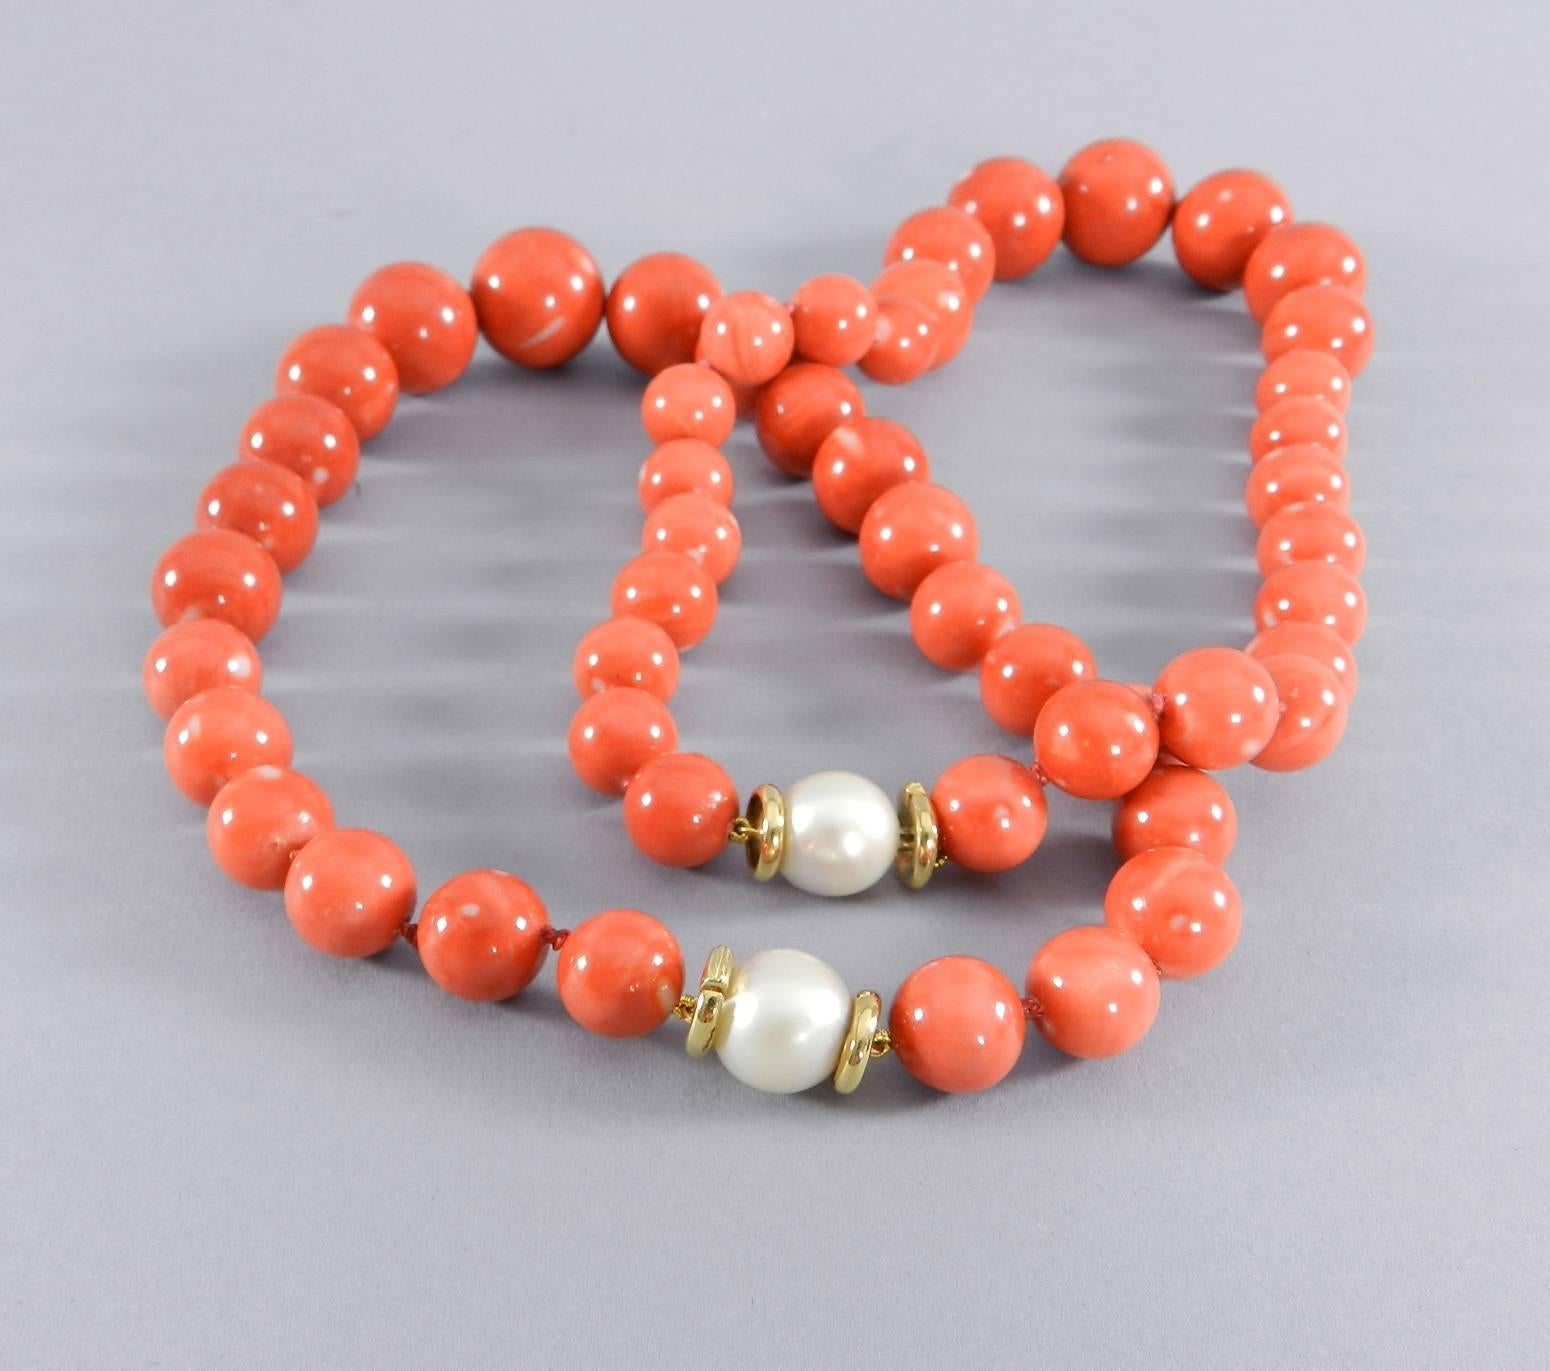 Trianon set of two coral beaded necklaces with 18k gold and pearl clasps. High quality graduated beads measuring 12mm to 22mm and finished with a 13mm pearl clasp and 18k yellow gold setting. Unsigned but original owner purchased these at Trianon